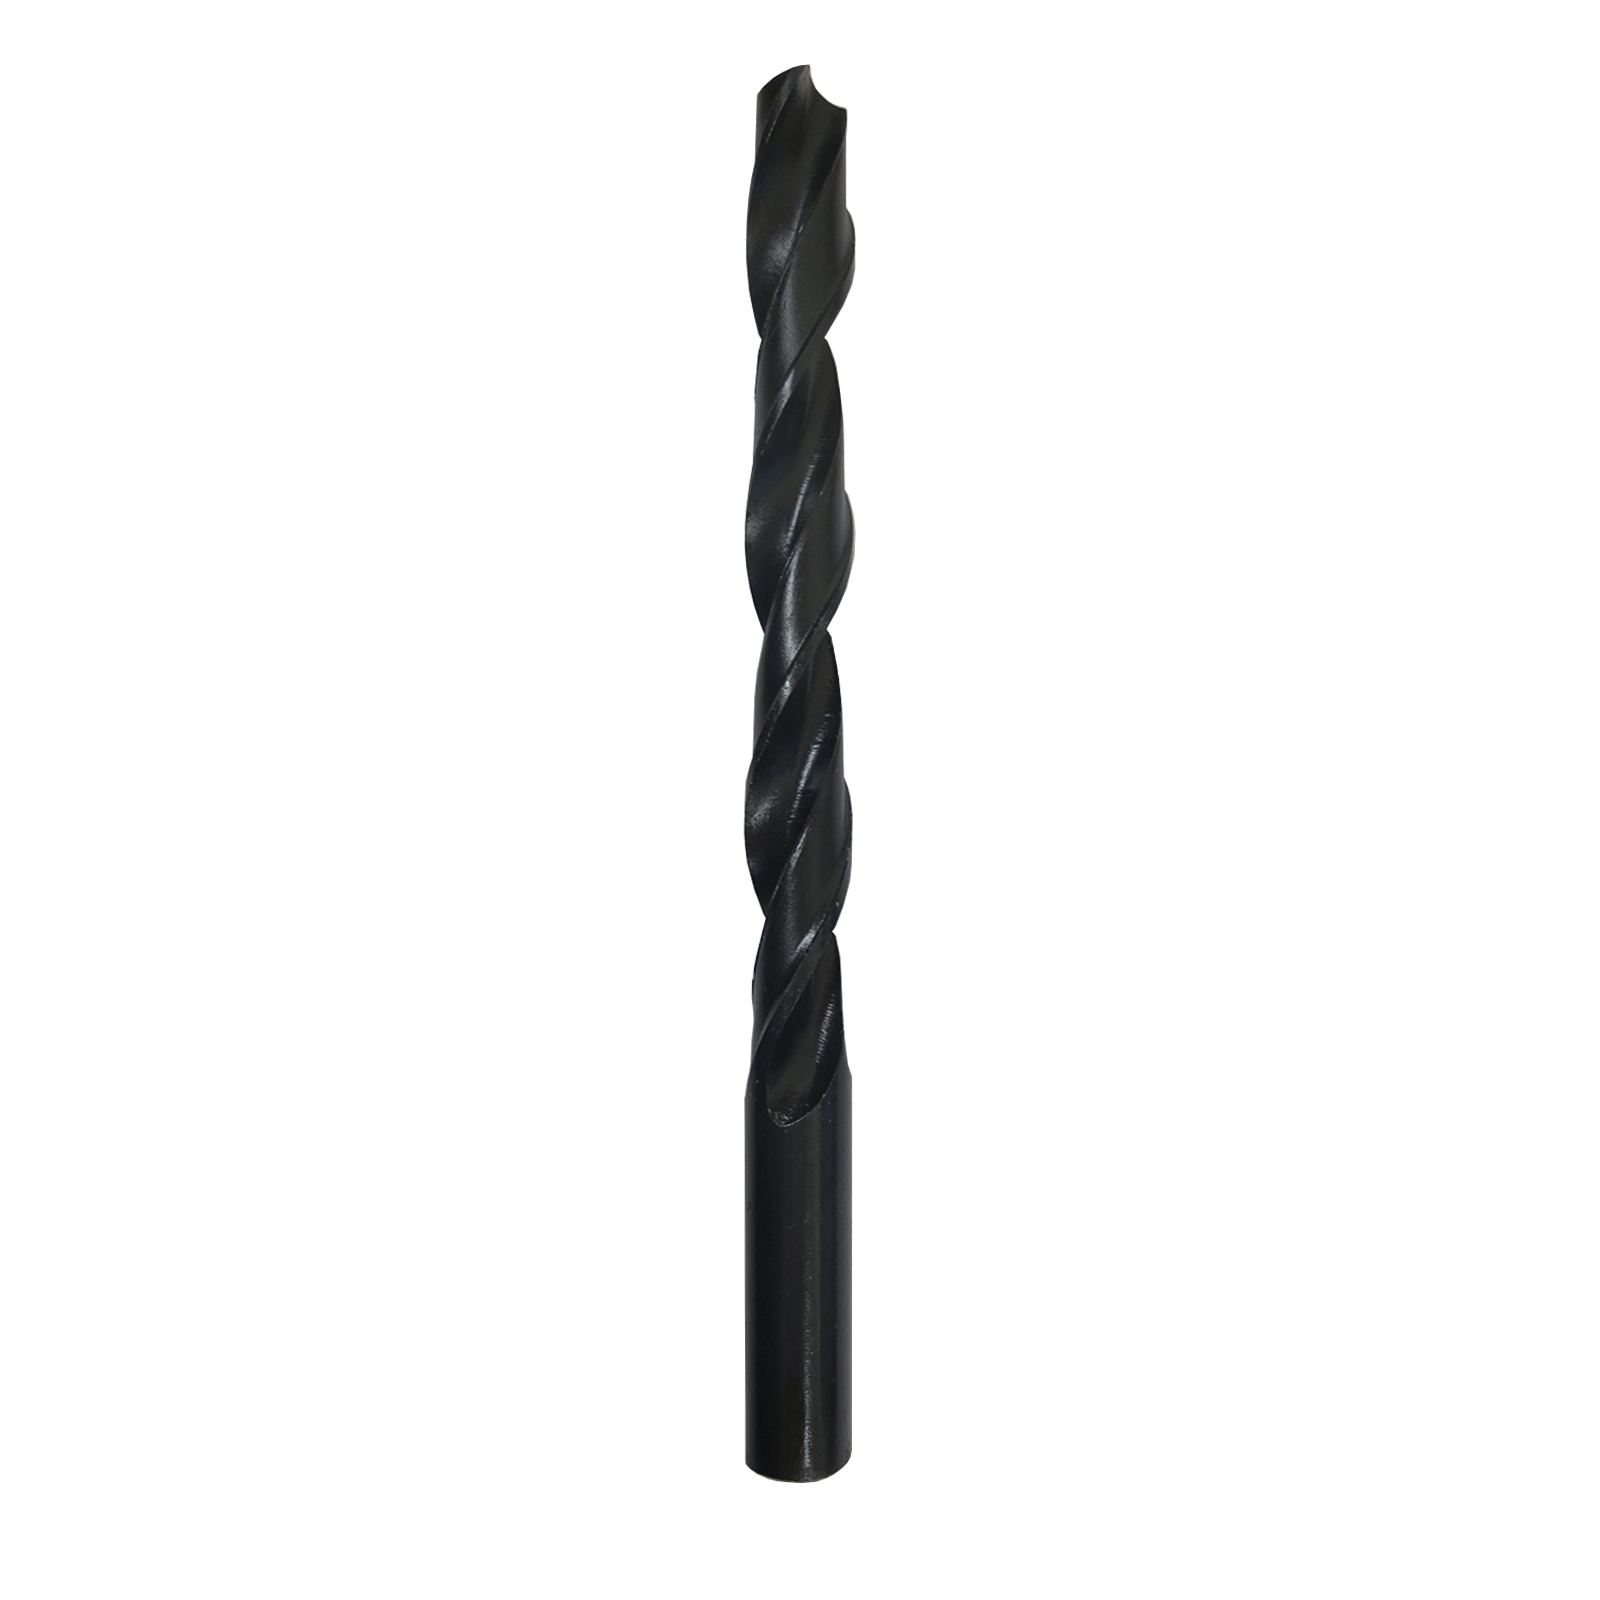 Gyros 45-42086 Premium (Made in US) Industrial Grade HSS Black Oxide Metric Drill Bit, 6.8 mm, Pack of 12